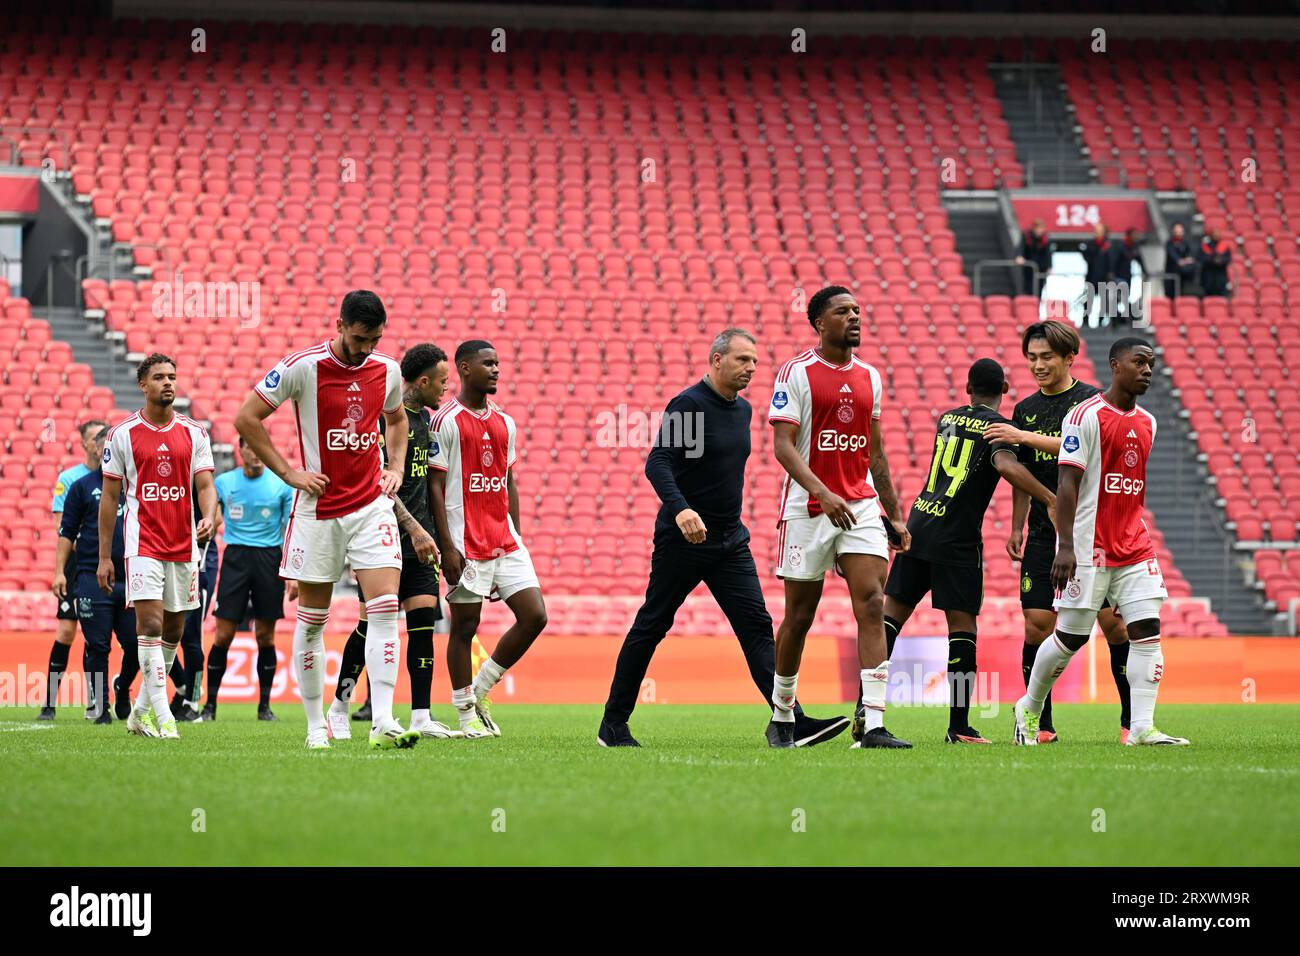 AMSTERDAM - (l-r) Devyne Rensch of Ajax, Josip Sutalo of Ajax, Jorrel Hato of Ajax, Ajax coach Maurice Steijn, Chuba Akpom of Ajax leave the field disappointed after the Dutch premier league match between Ajax Amsterdam and Feyenoord Rotterdam in the Johan Cruijff ArenA on September 27, 2023 in Amsterdam, Netherlands. The match will be played without an audience. The game was finally stopped on Sunday after 55 minutes with Feyenoord taking a 3-0 lead after repeated fireworks on the field. ANP OLAF KRAAK Stock Photo